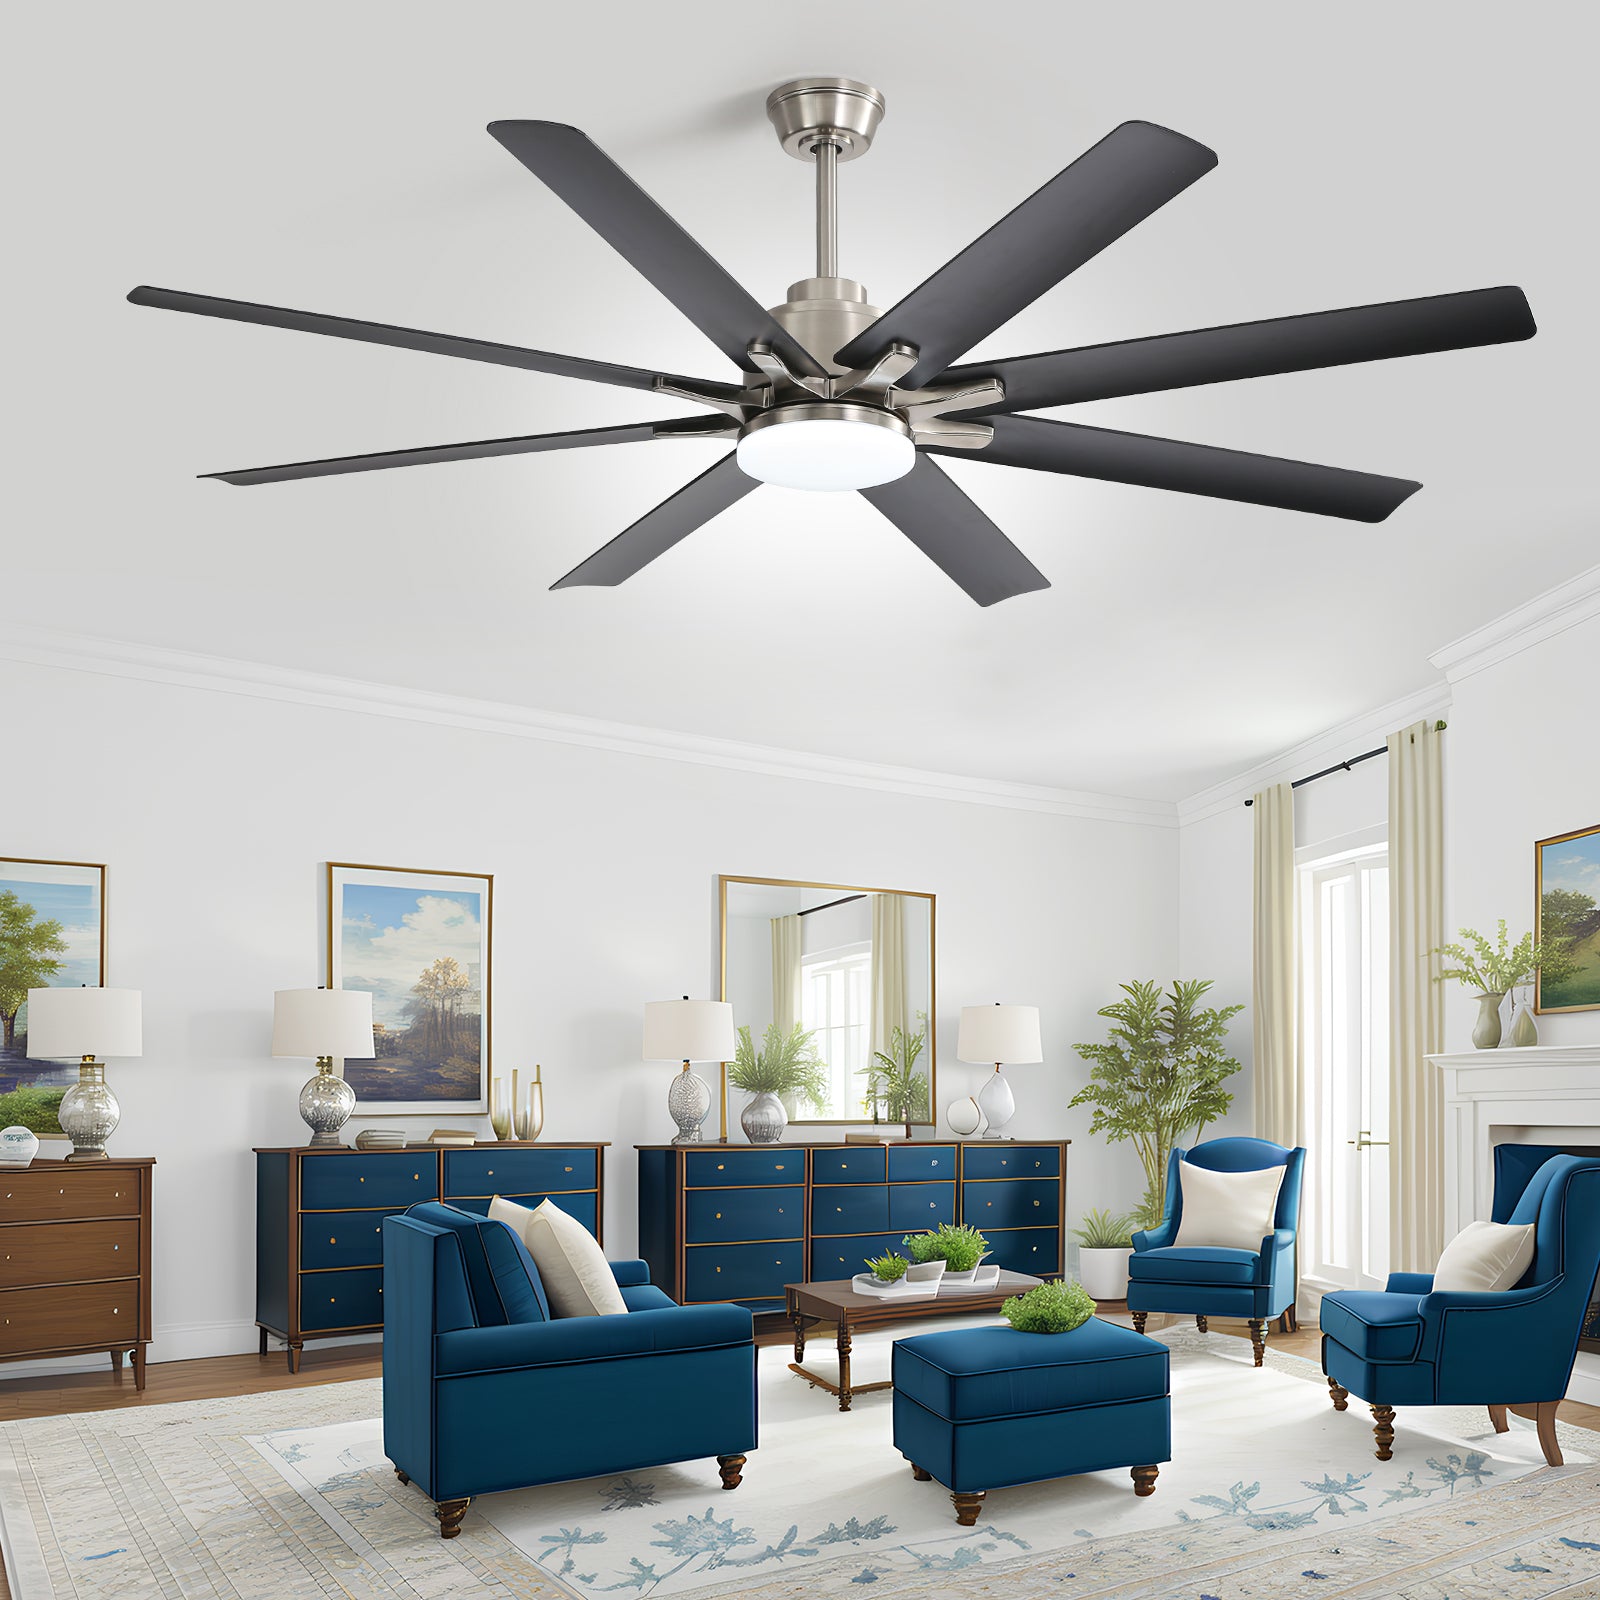 66 Inch Large Ceiling Fan With Dimmable Led Light 8 nickel-abs